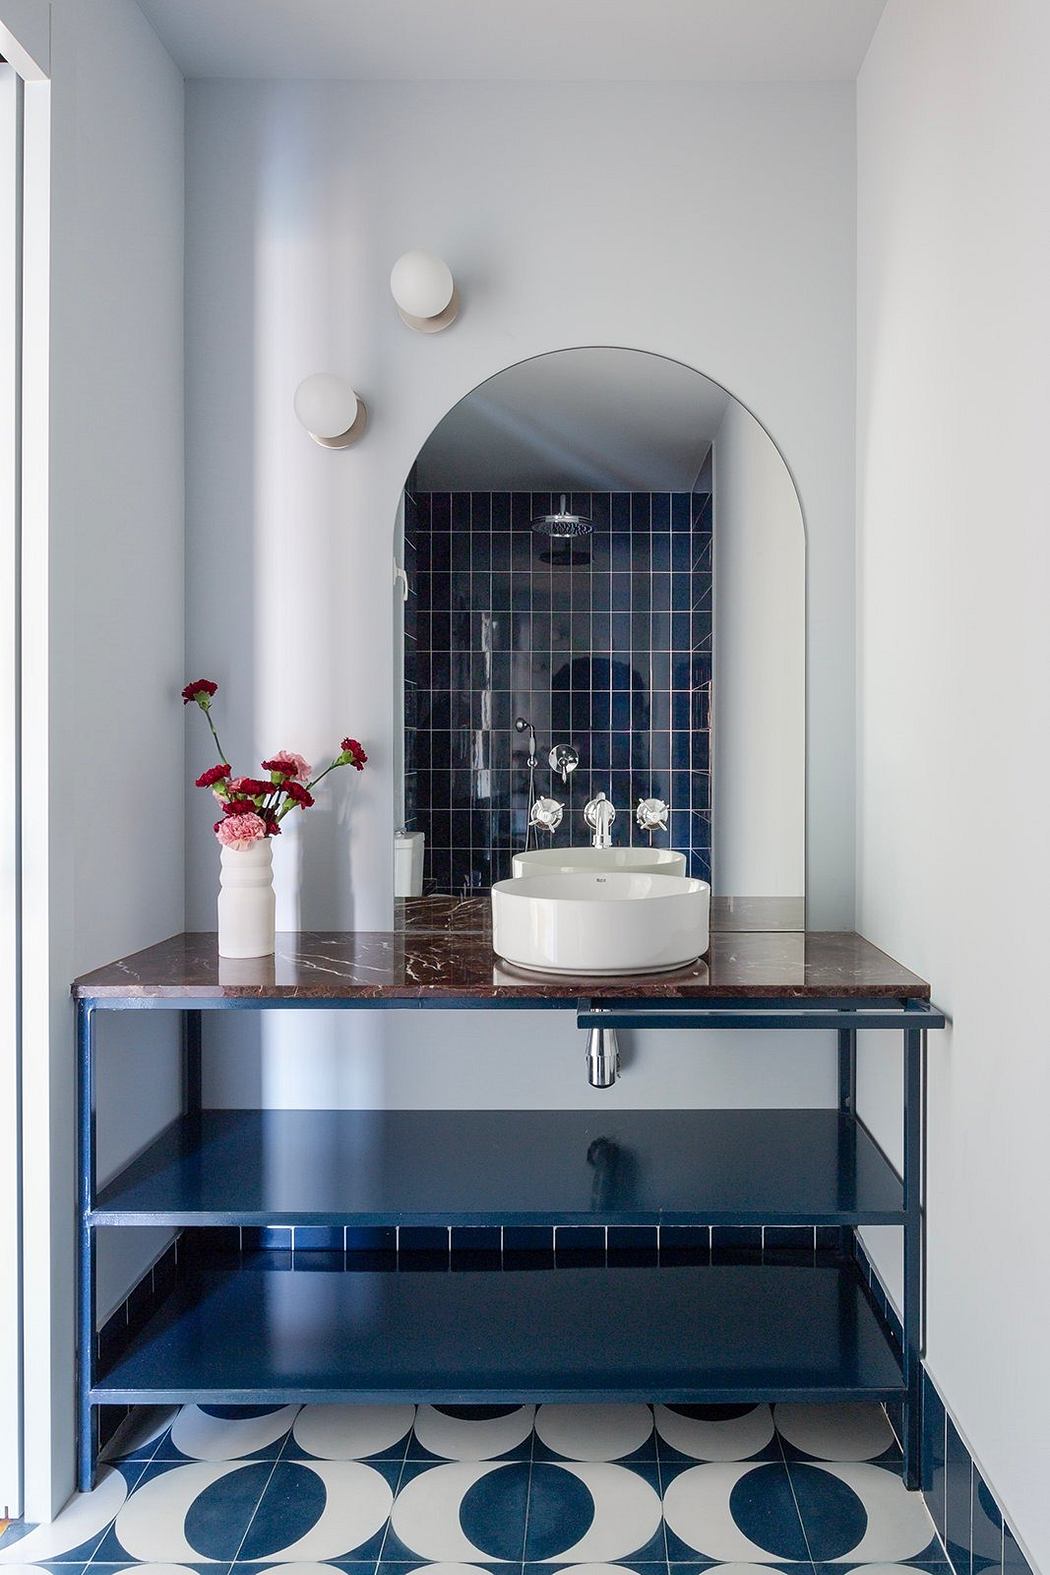 Modern bathroom nook with arched mirror, navy blue tiles, and patterned